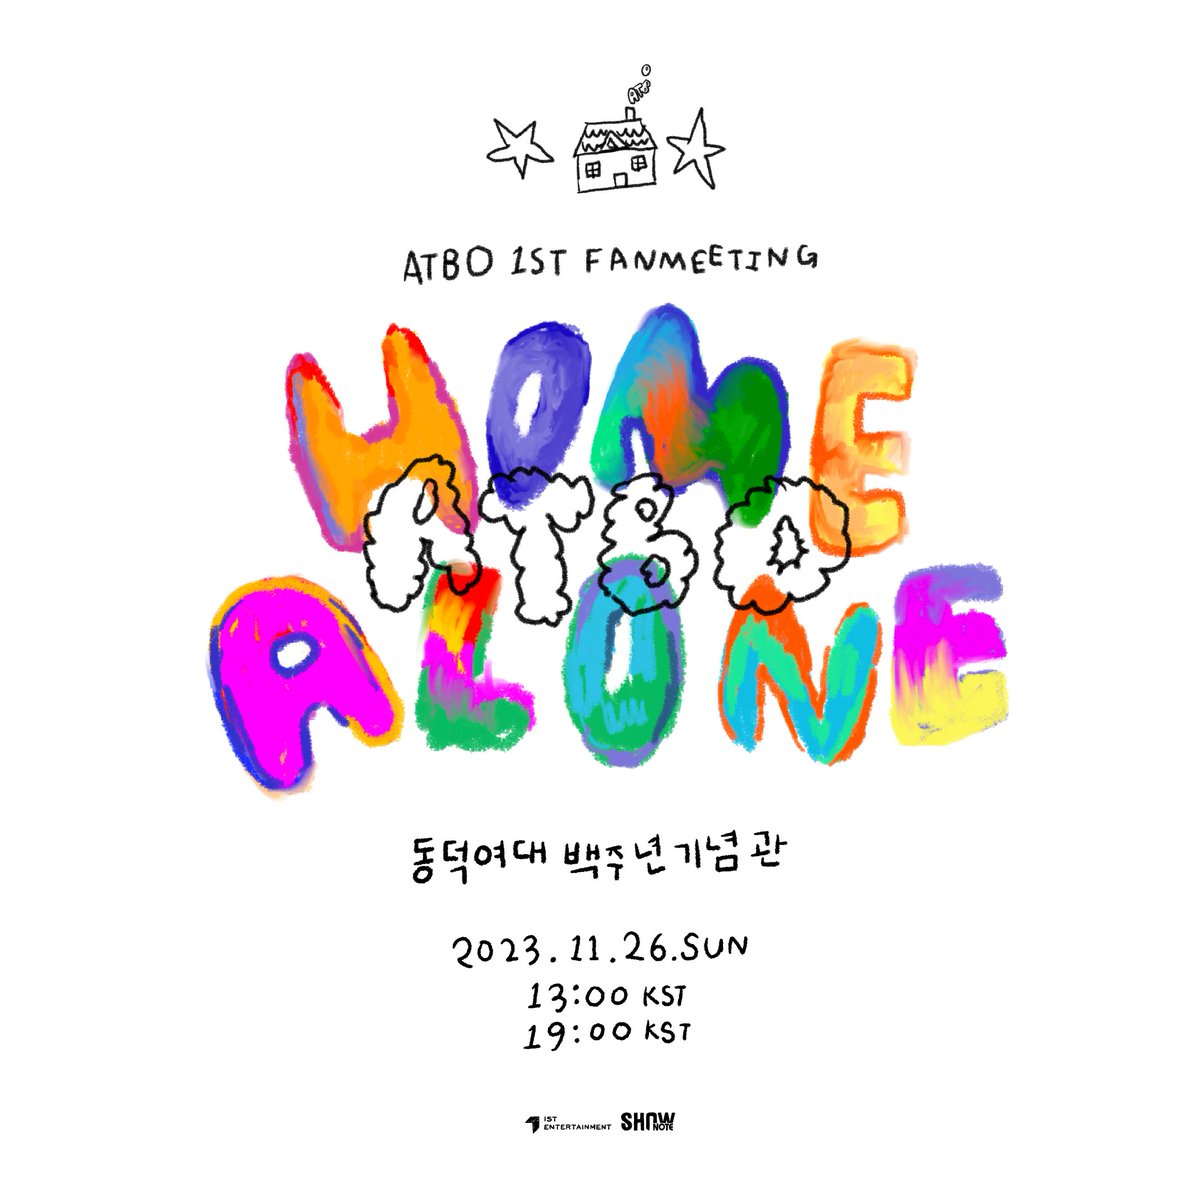 #ATBO announces 1st fanmeeting #HOME_ALONE to be held on 26 November at Dongduk University Centennial Hall. Ticketing will be opened on 31 October for fanclub and 3 November for general public #KoreanUpdates RZ